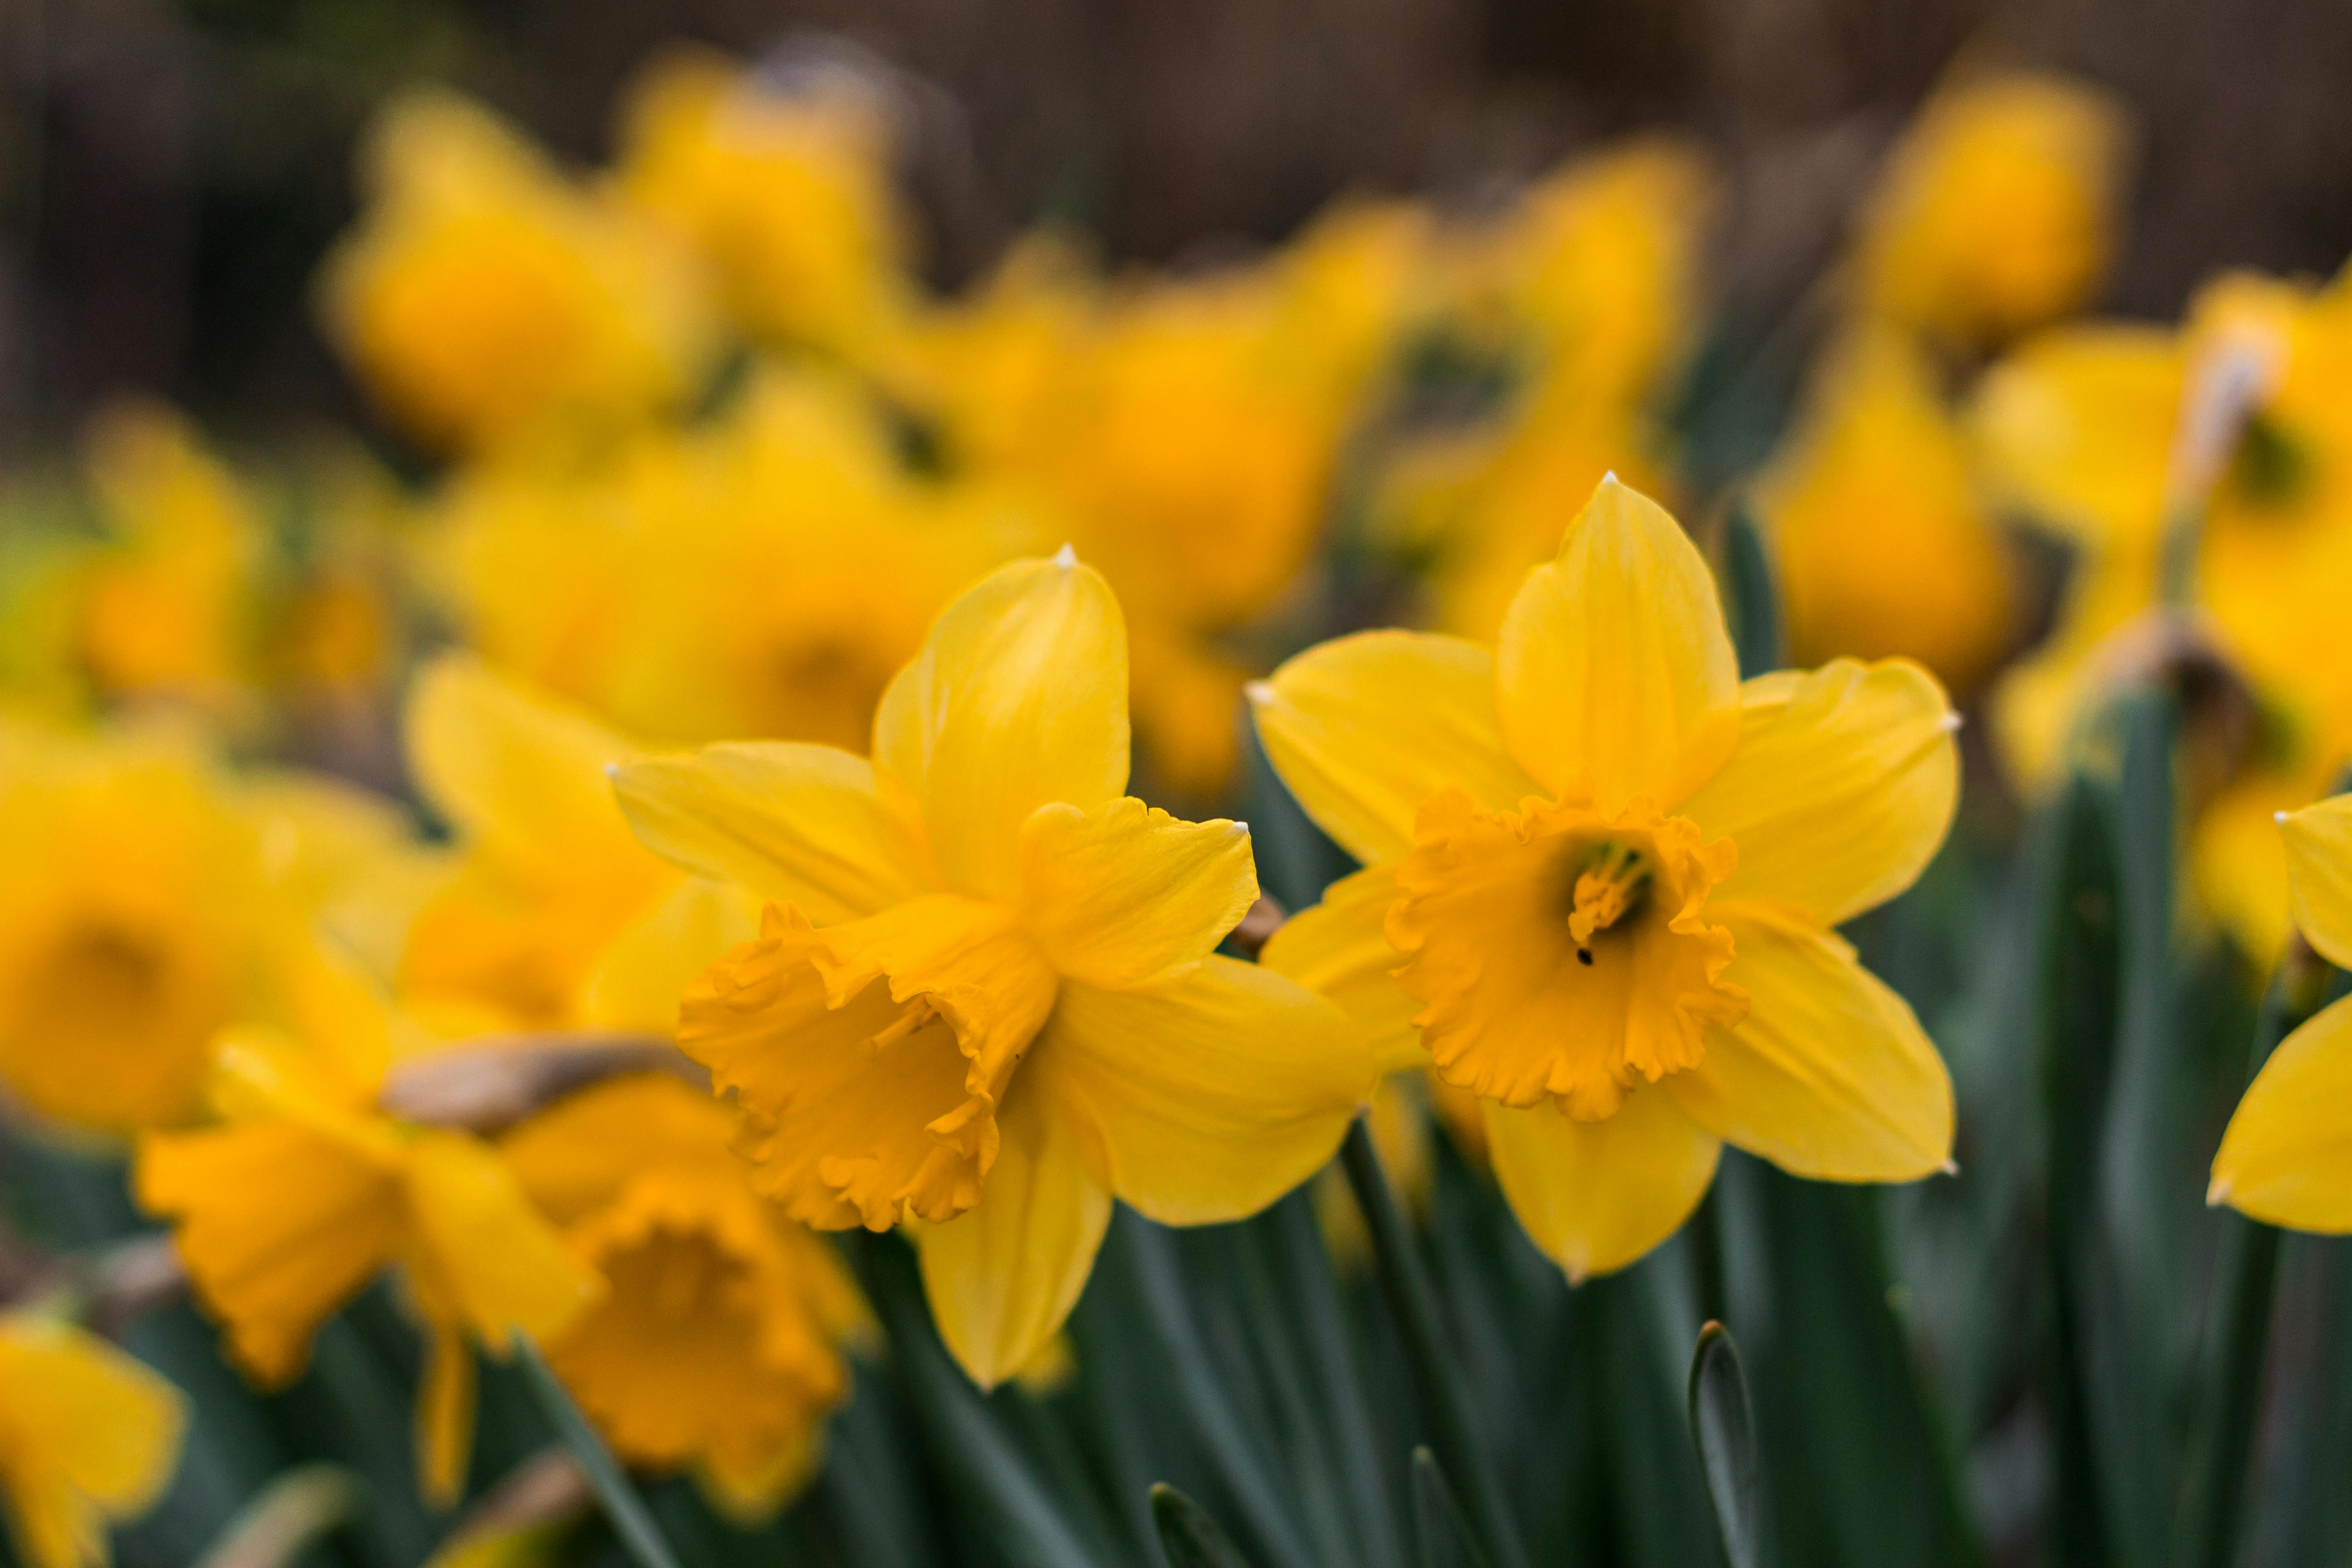 Yellow Daffodils In Selective Focus Photography · Free Stock Photo